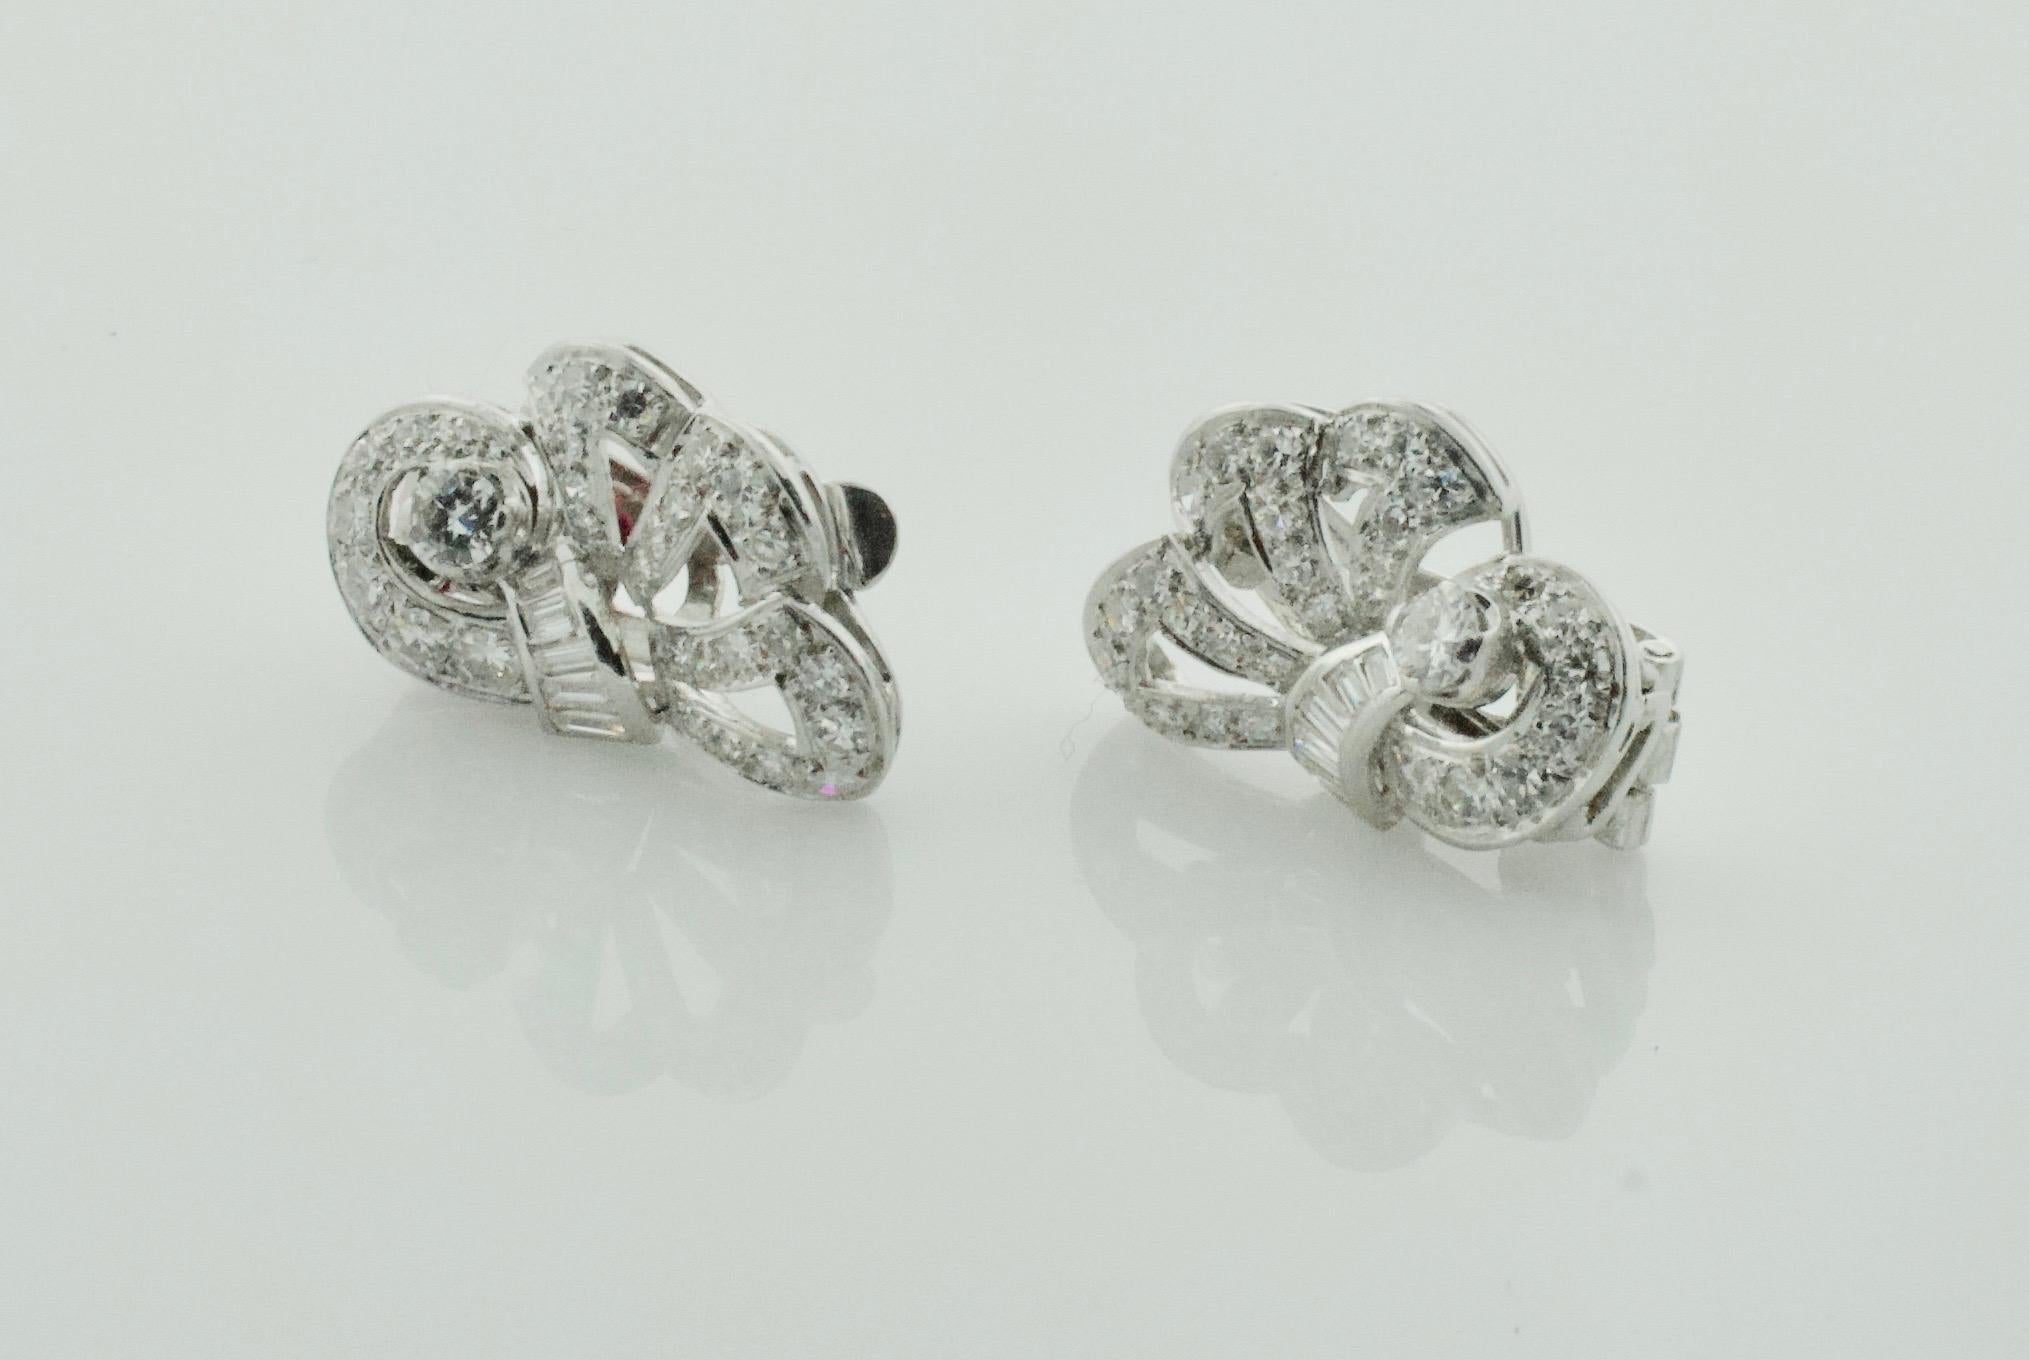 1940's Handmade Platinum Diamond Earrings  2.60 Carats 
Beautifully Made with a Left and Right Earring.  Which is which?  You decide.

Two Round Brilliant Cut Diamonds Weighing .30 Carats Approximately 
Ten Baguette Cut Diamonds Weighing .50 Carats